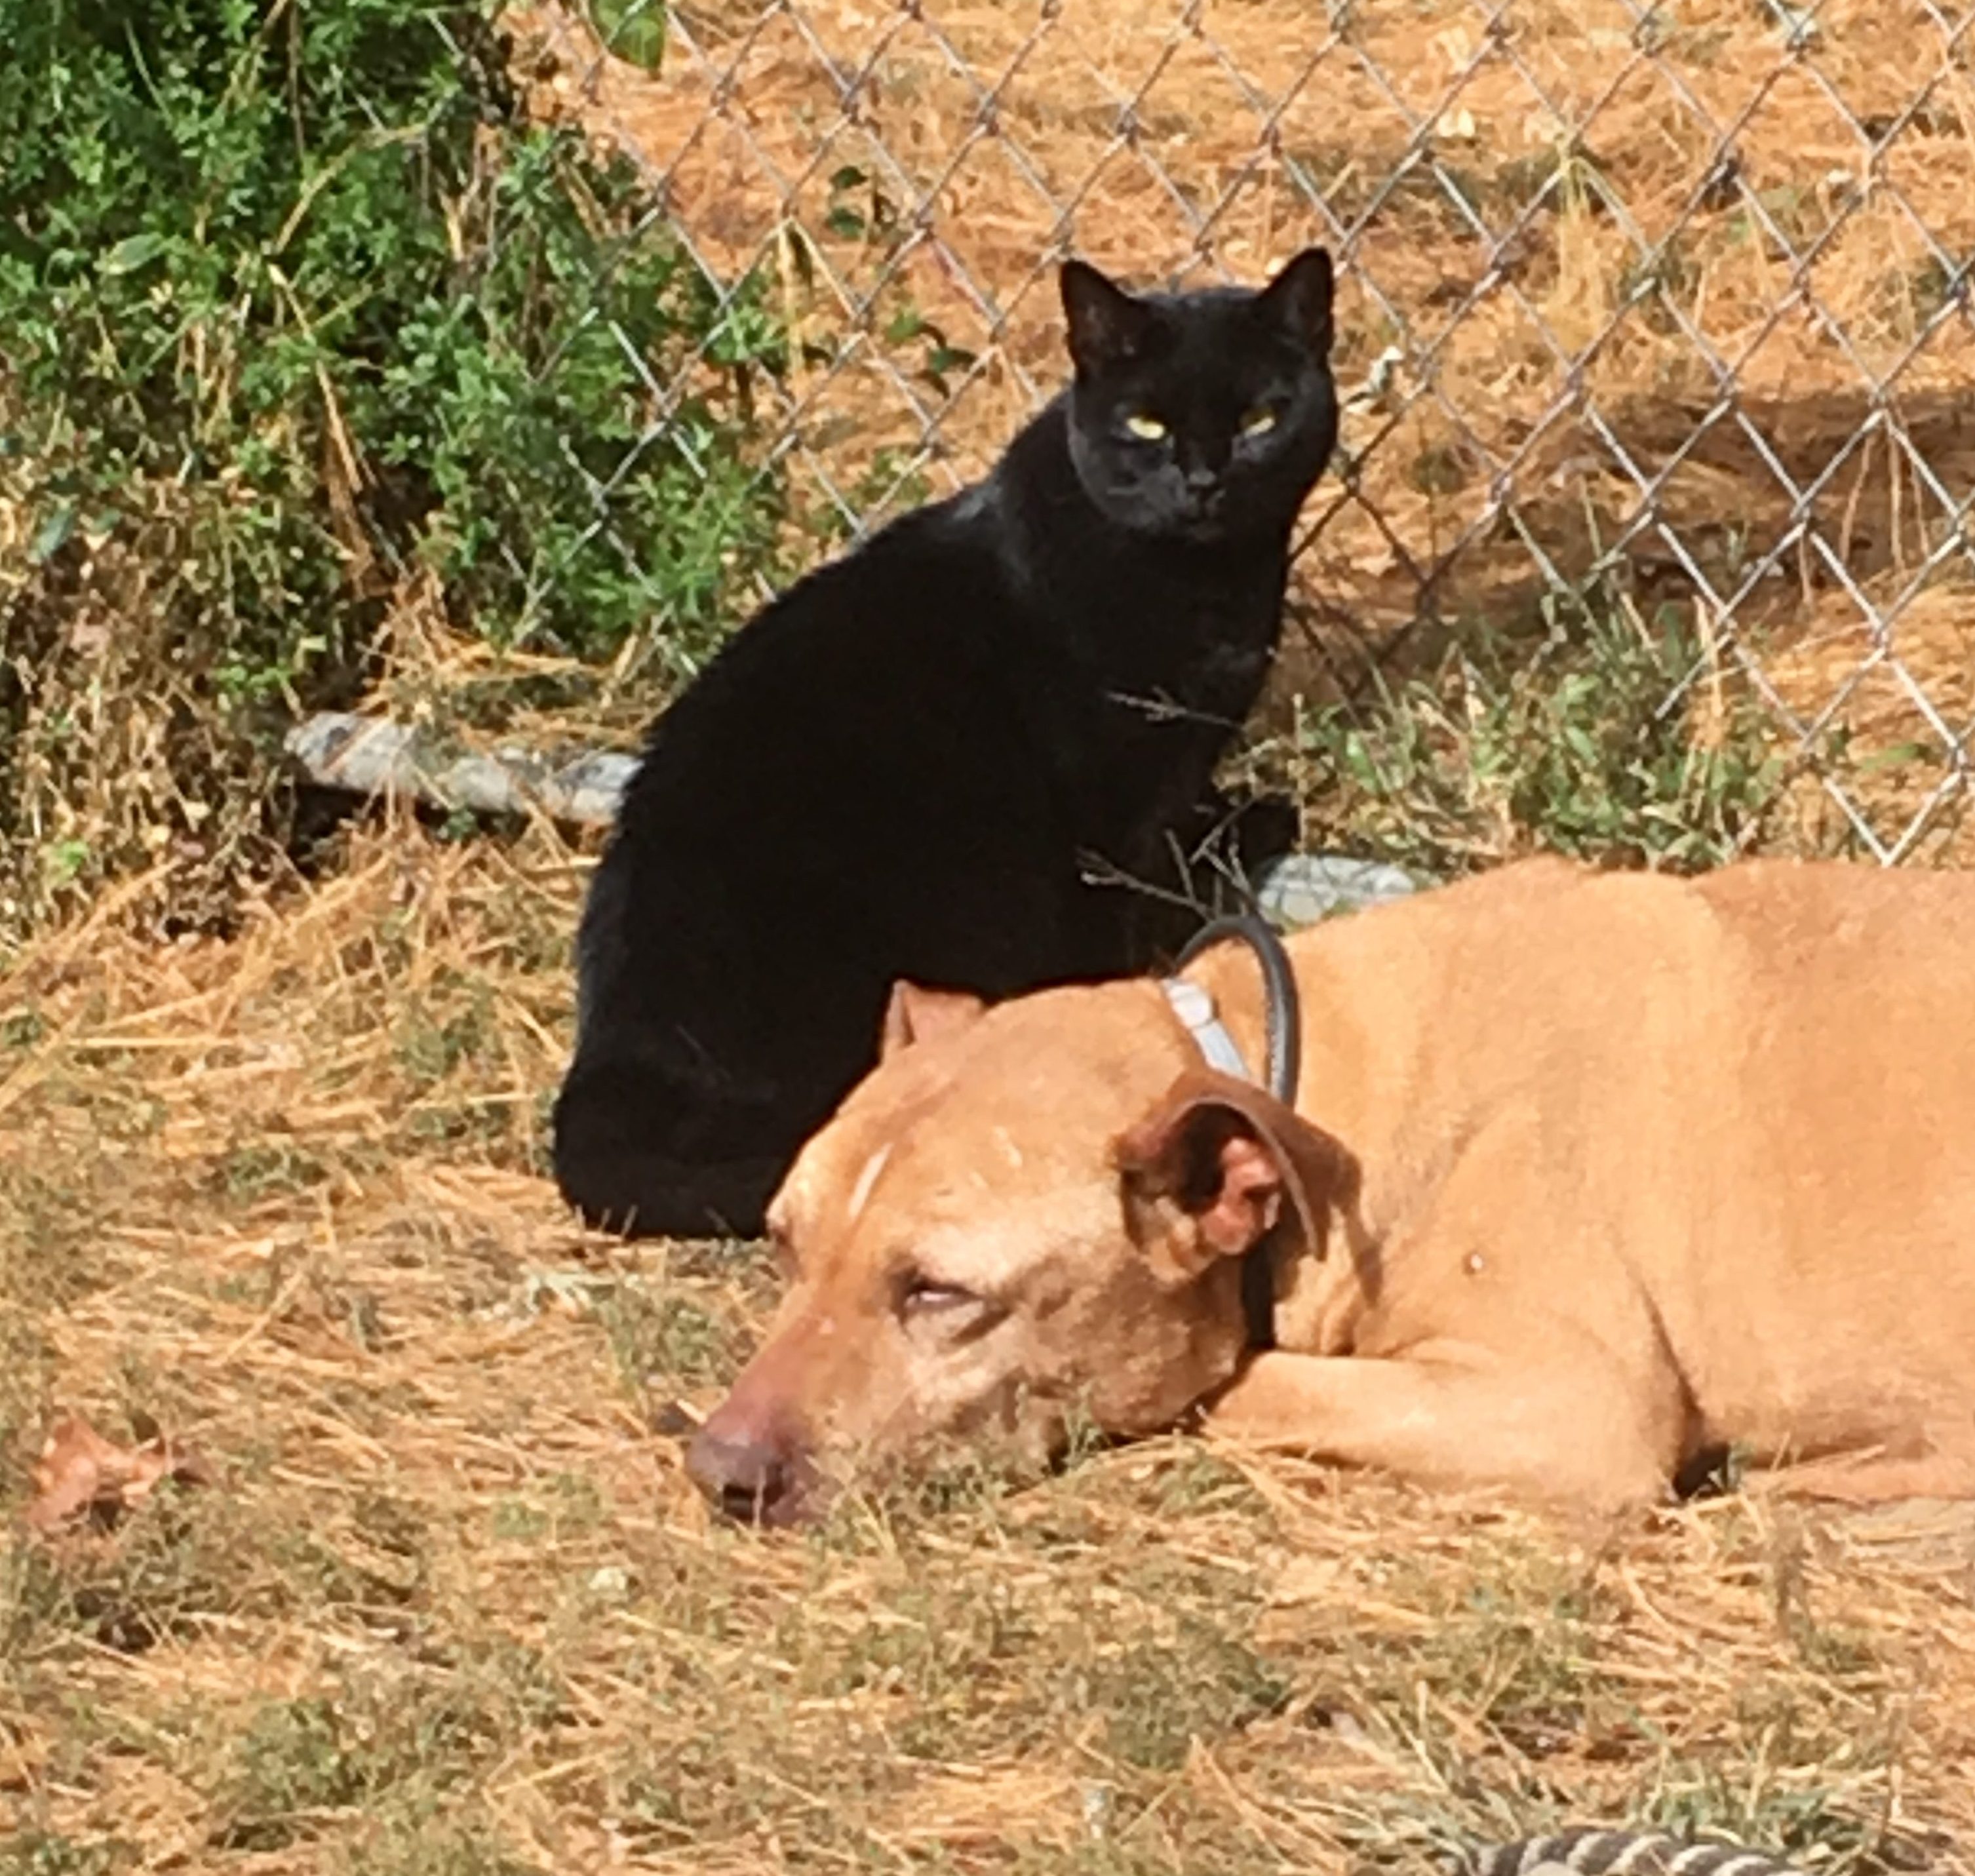 photo of black cat and dog